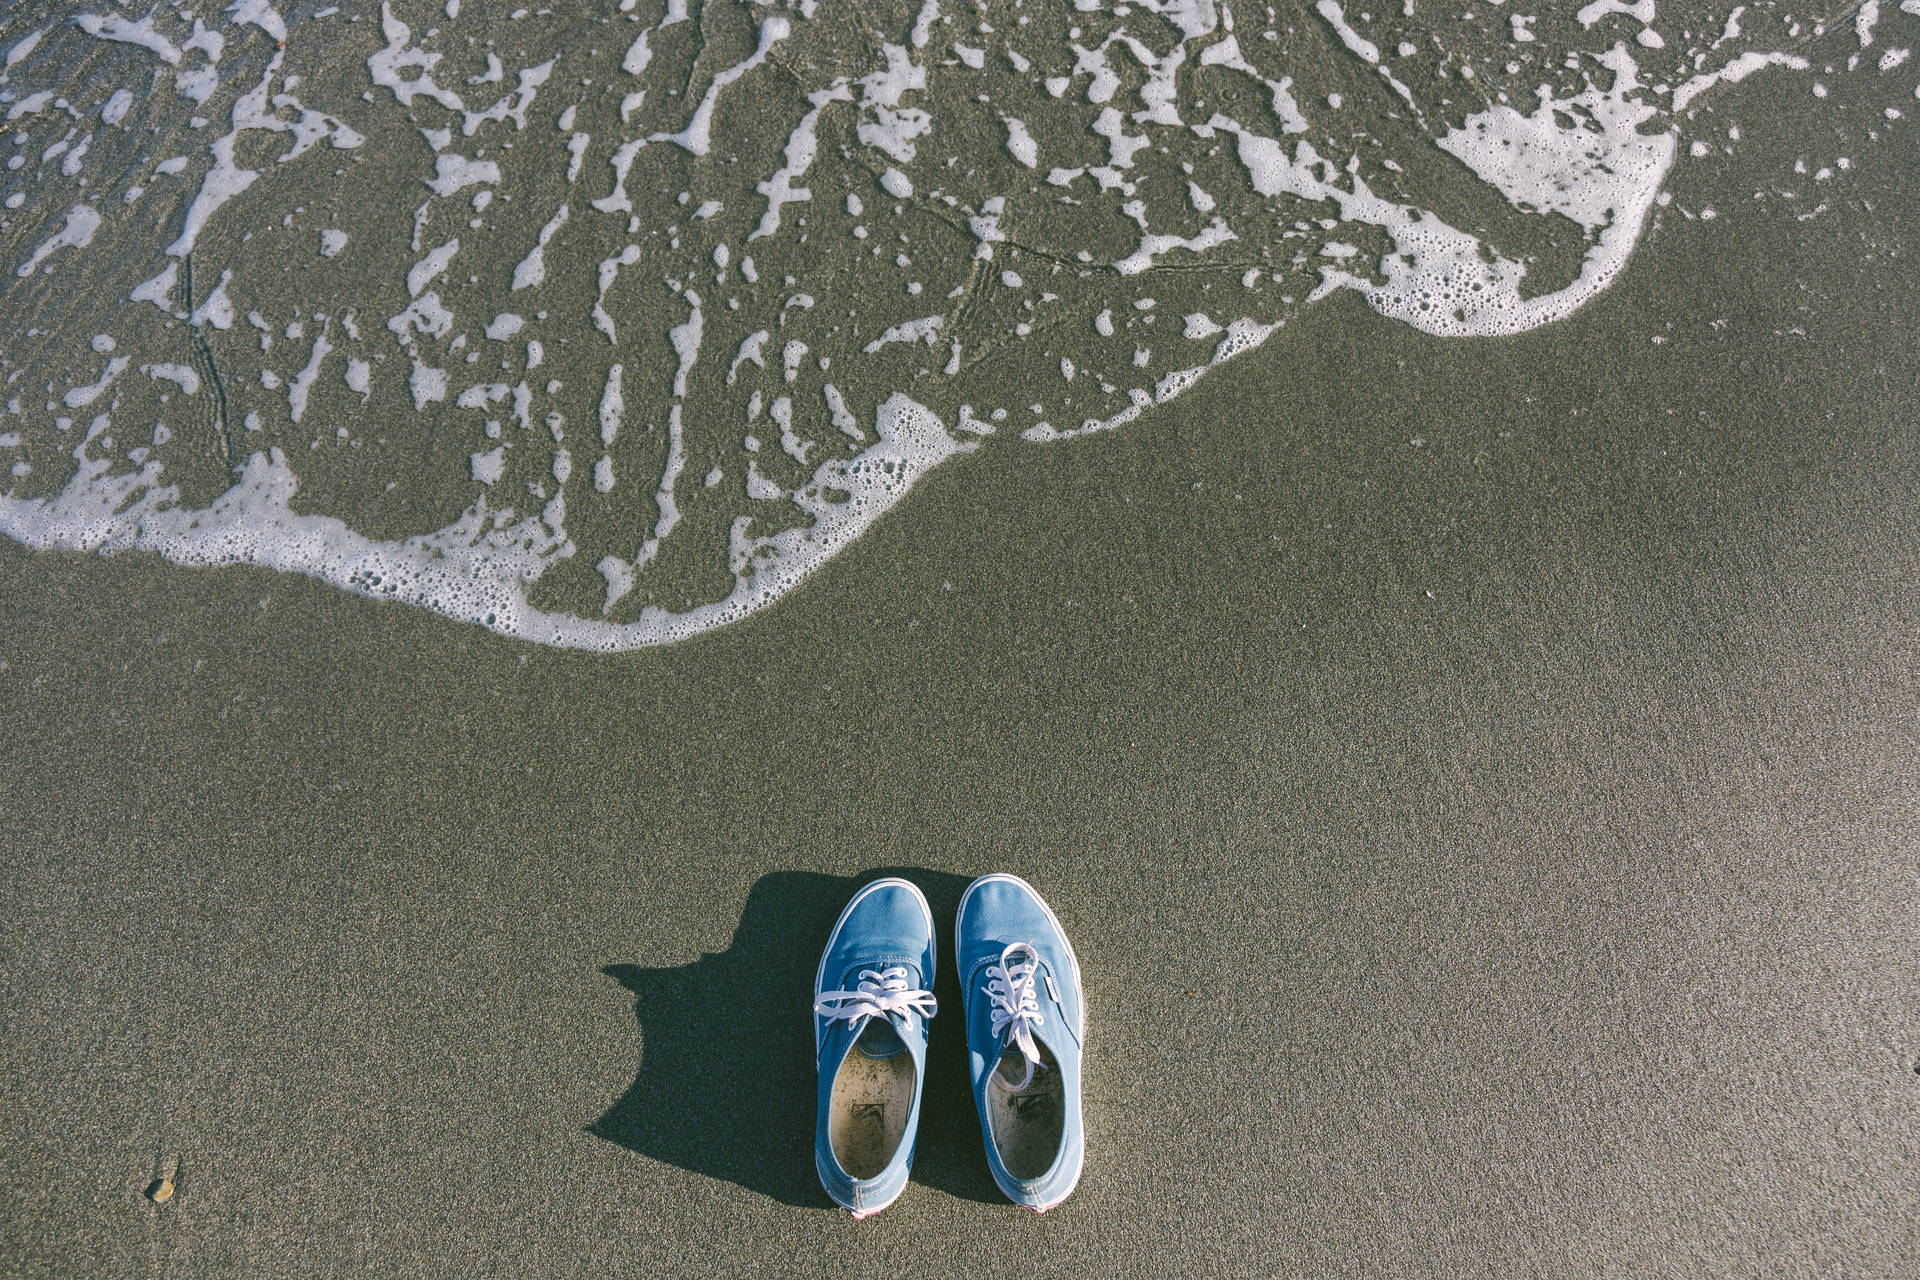 Blue Shoes By The Beach